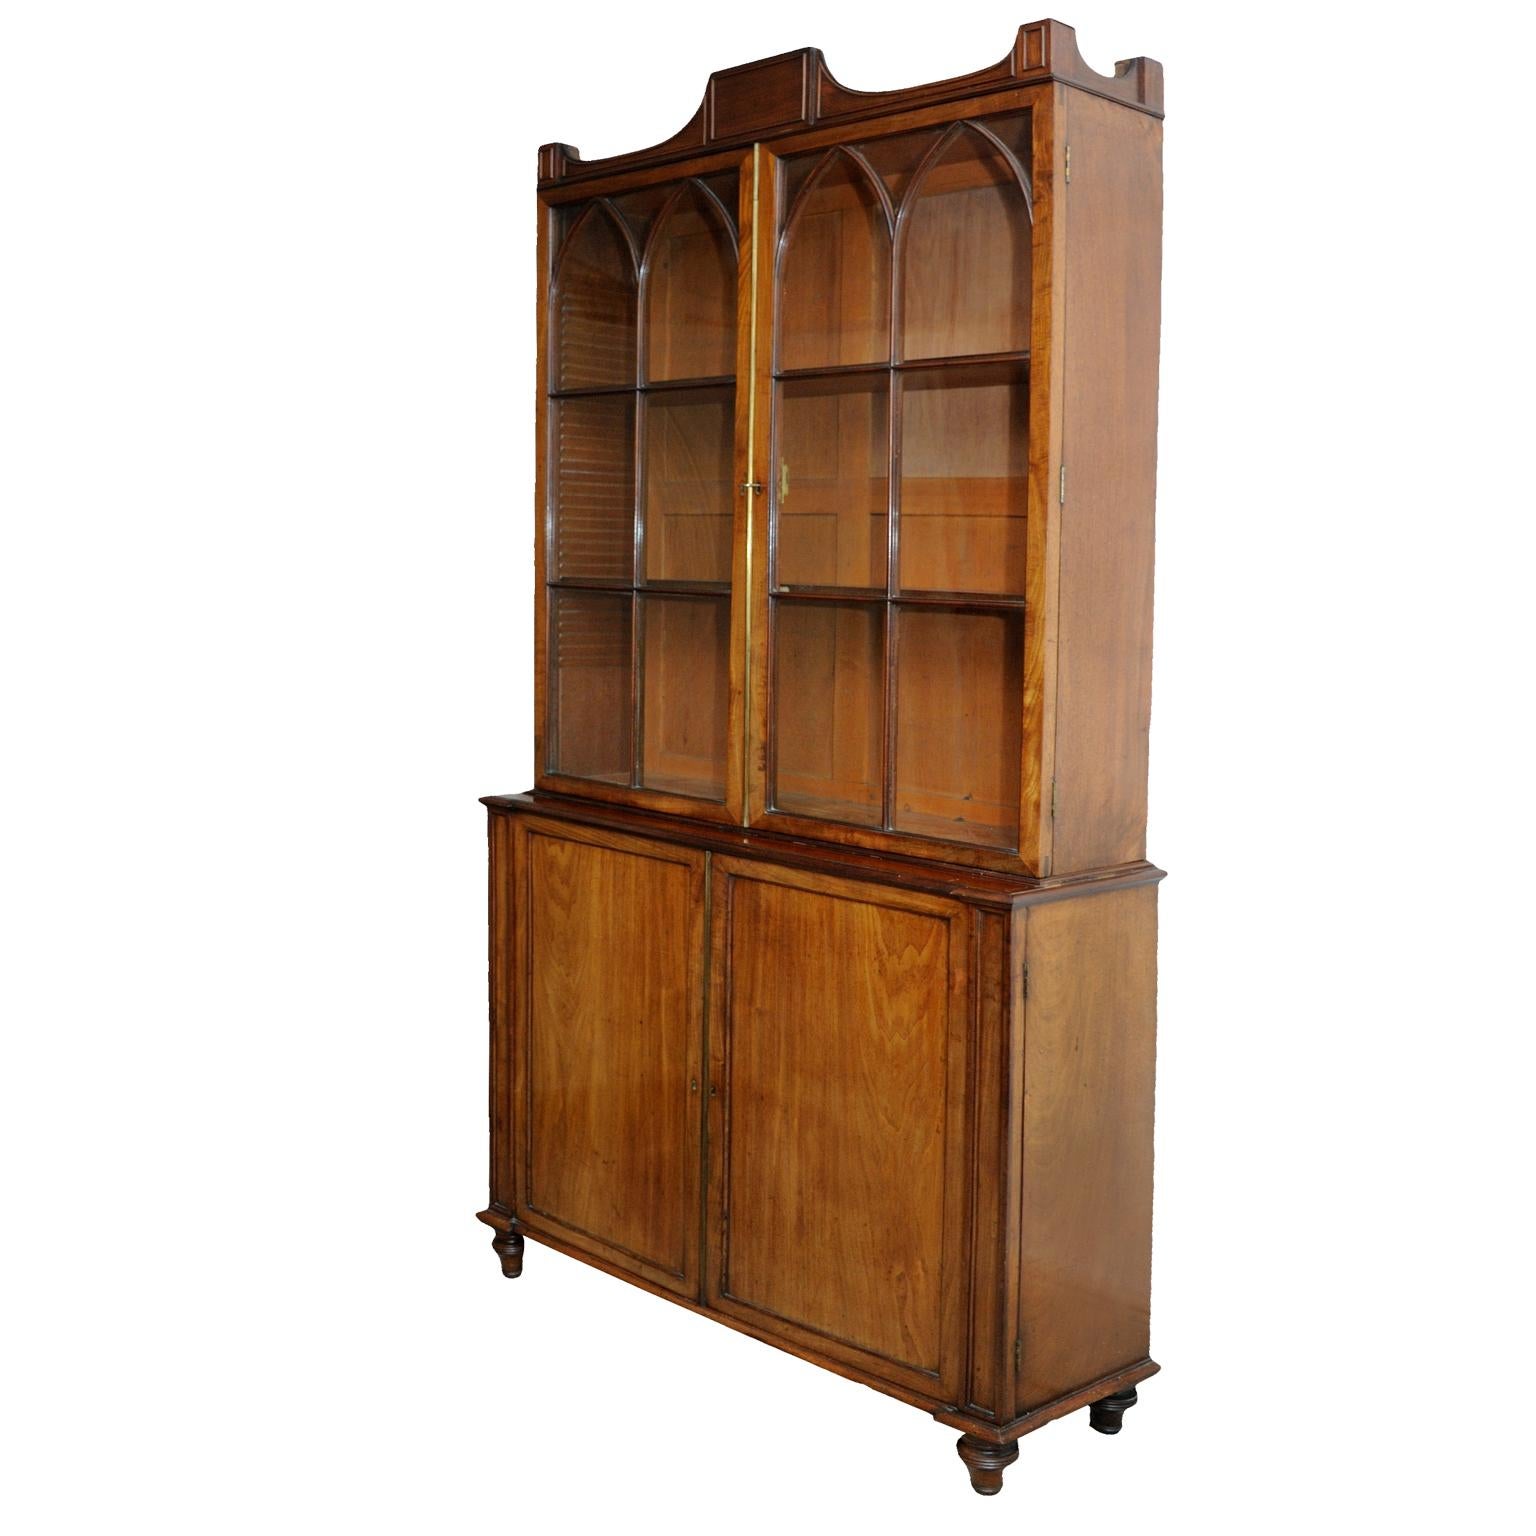 This is a superb English George III mahogany satinwood and purple heart glazed bookcase of unusually shallow proportions and highly workable. Attributed to Gillows of Lancaster, circa 1780. 

Full measurements:
Height 229cm (90